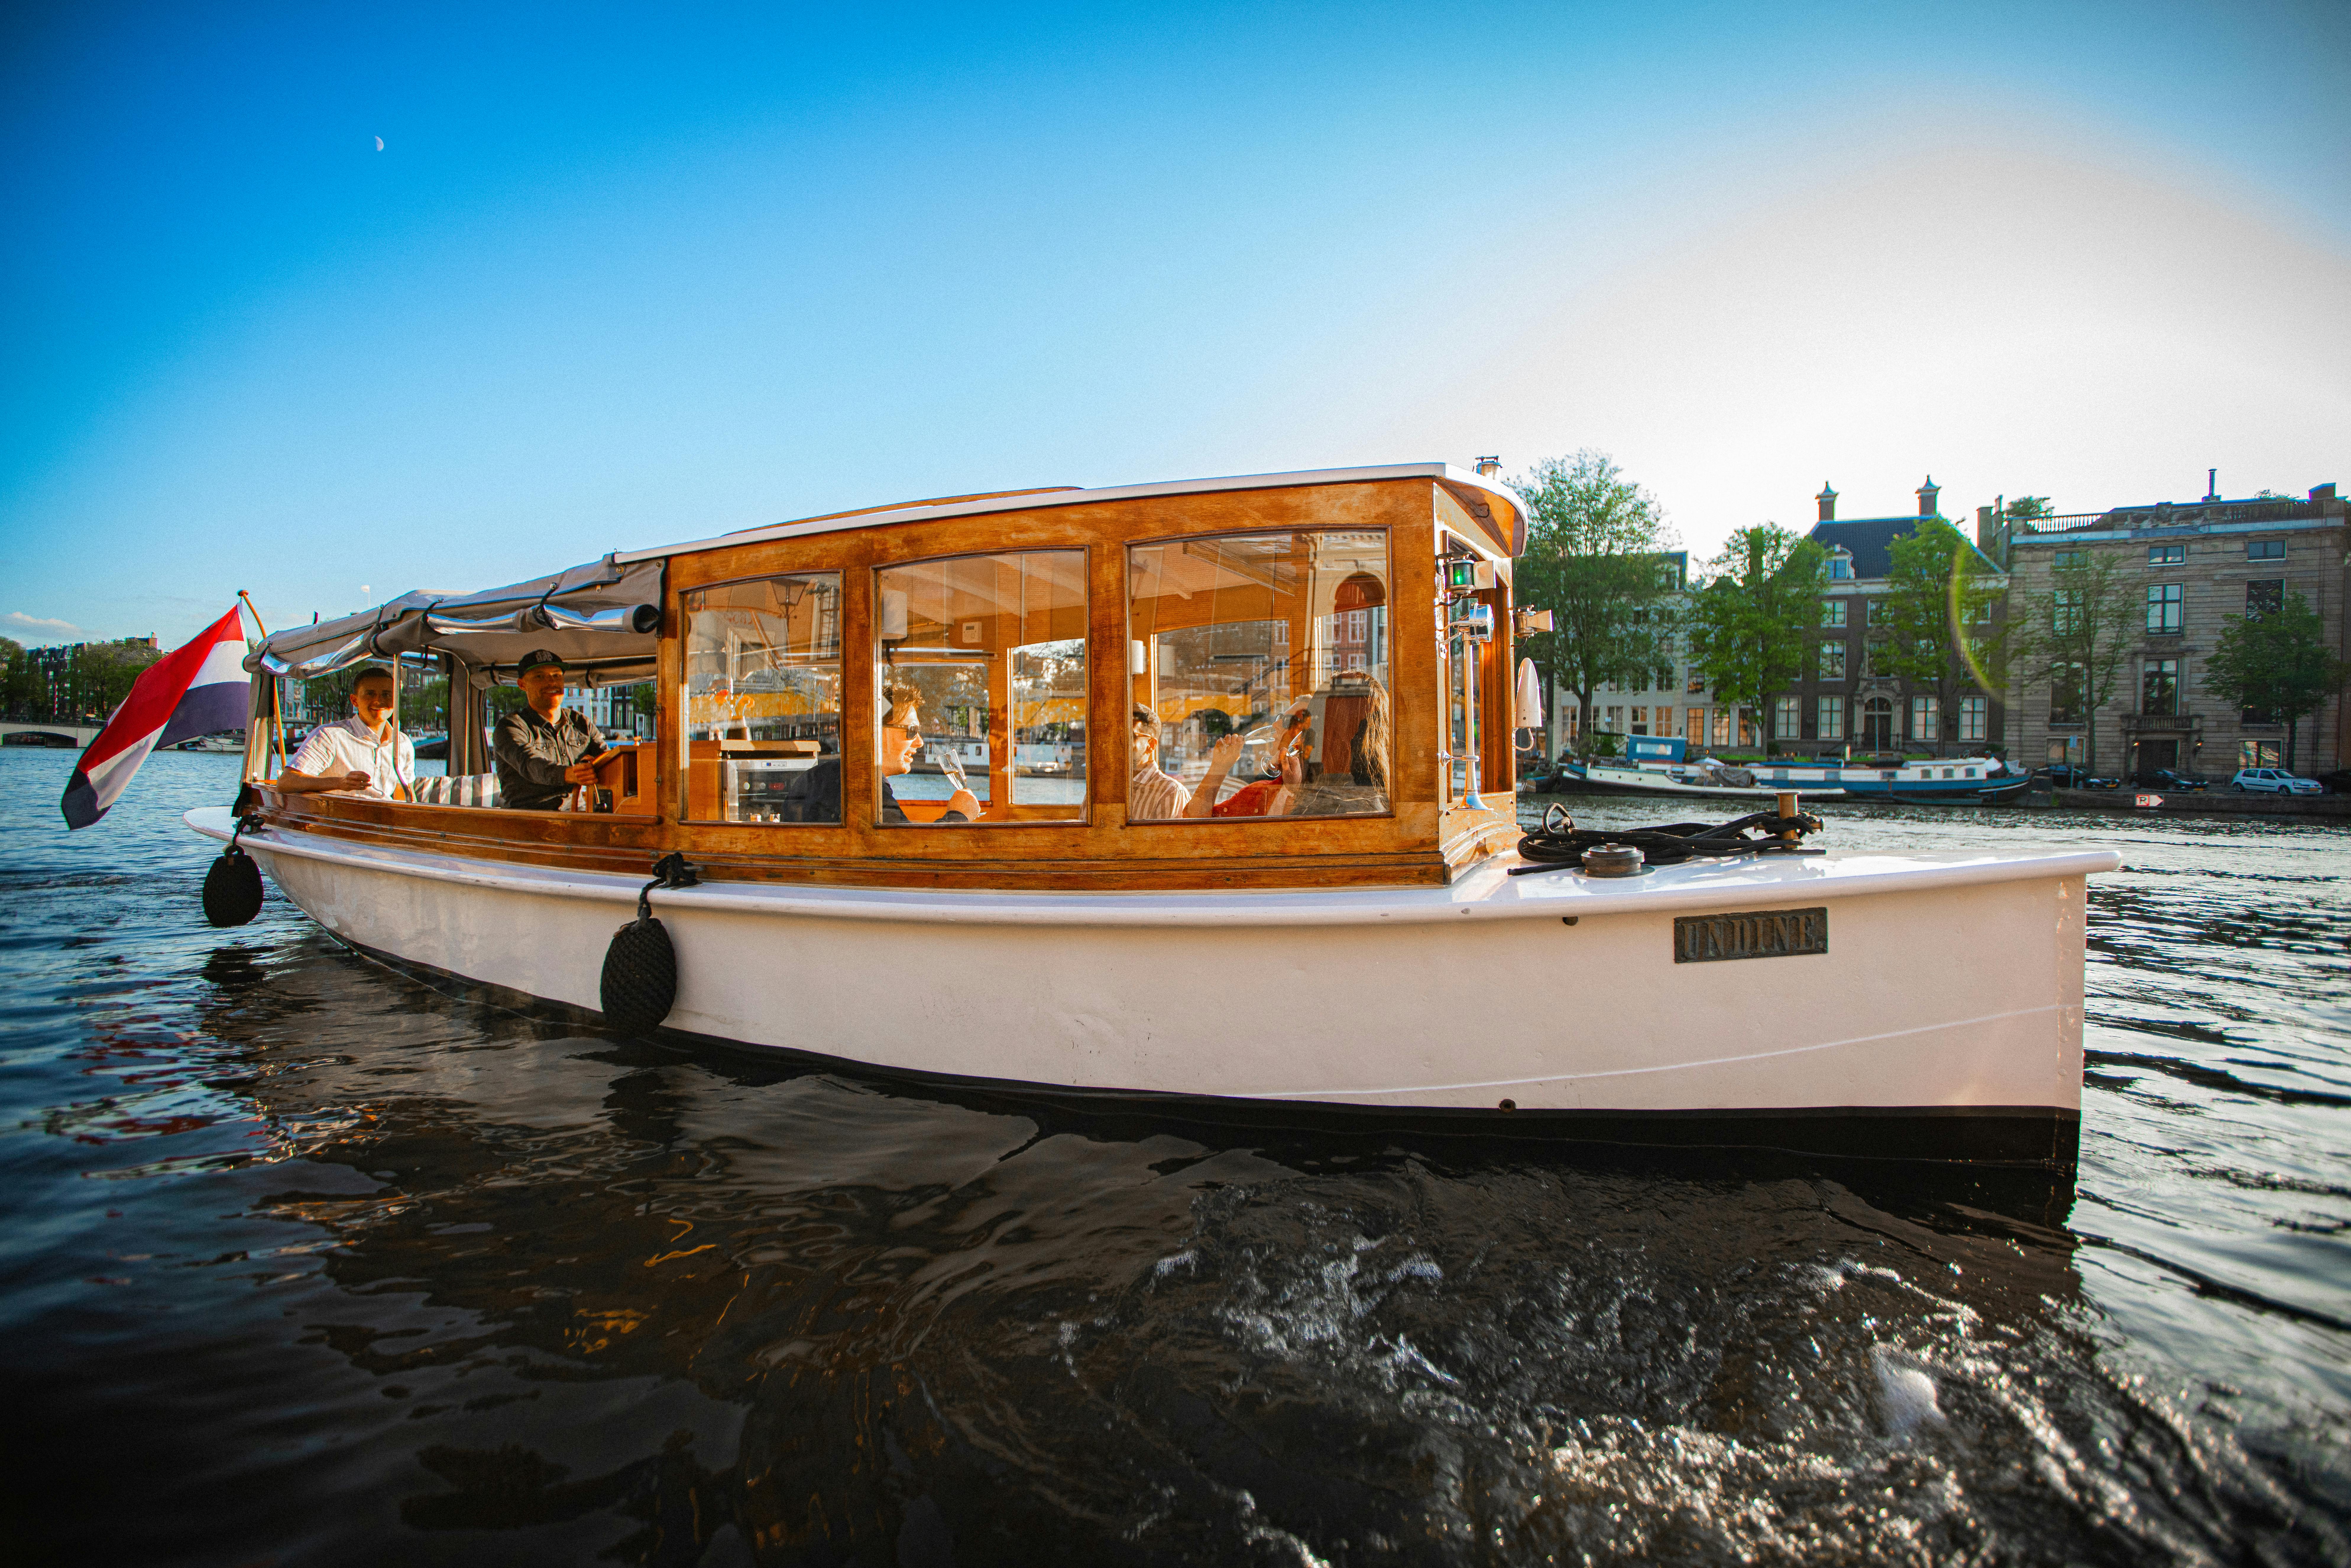 Prosecco and wine cruise on the Amsterdam canals